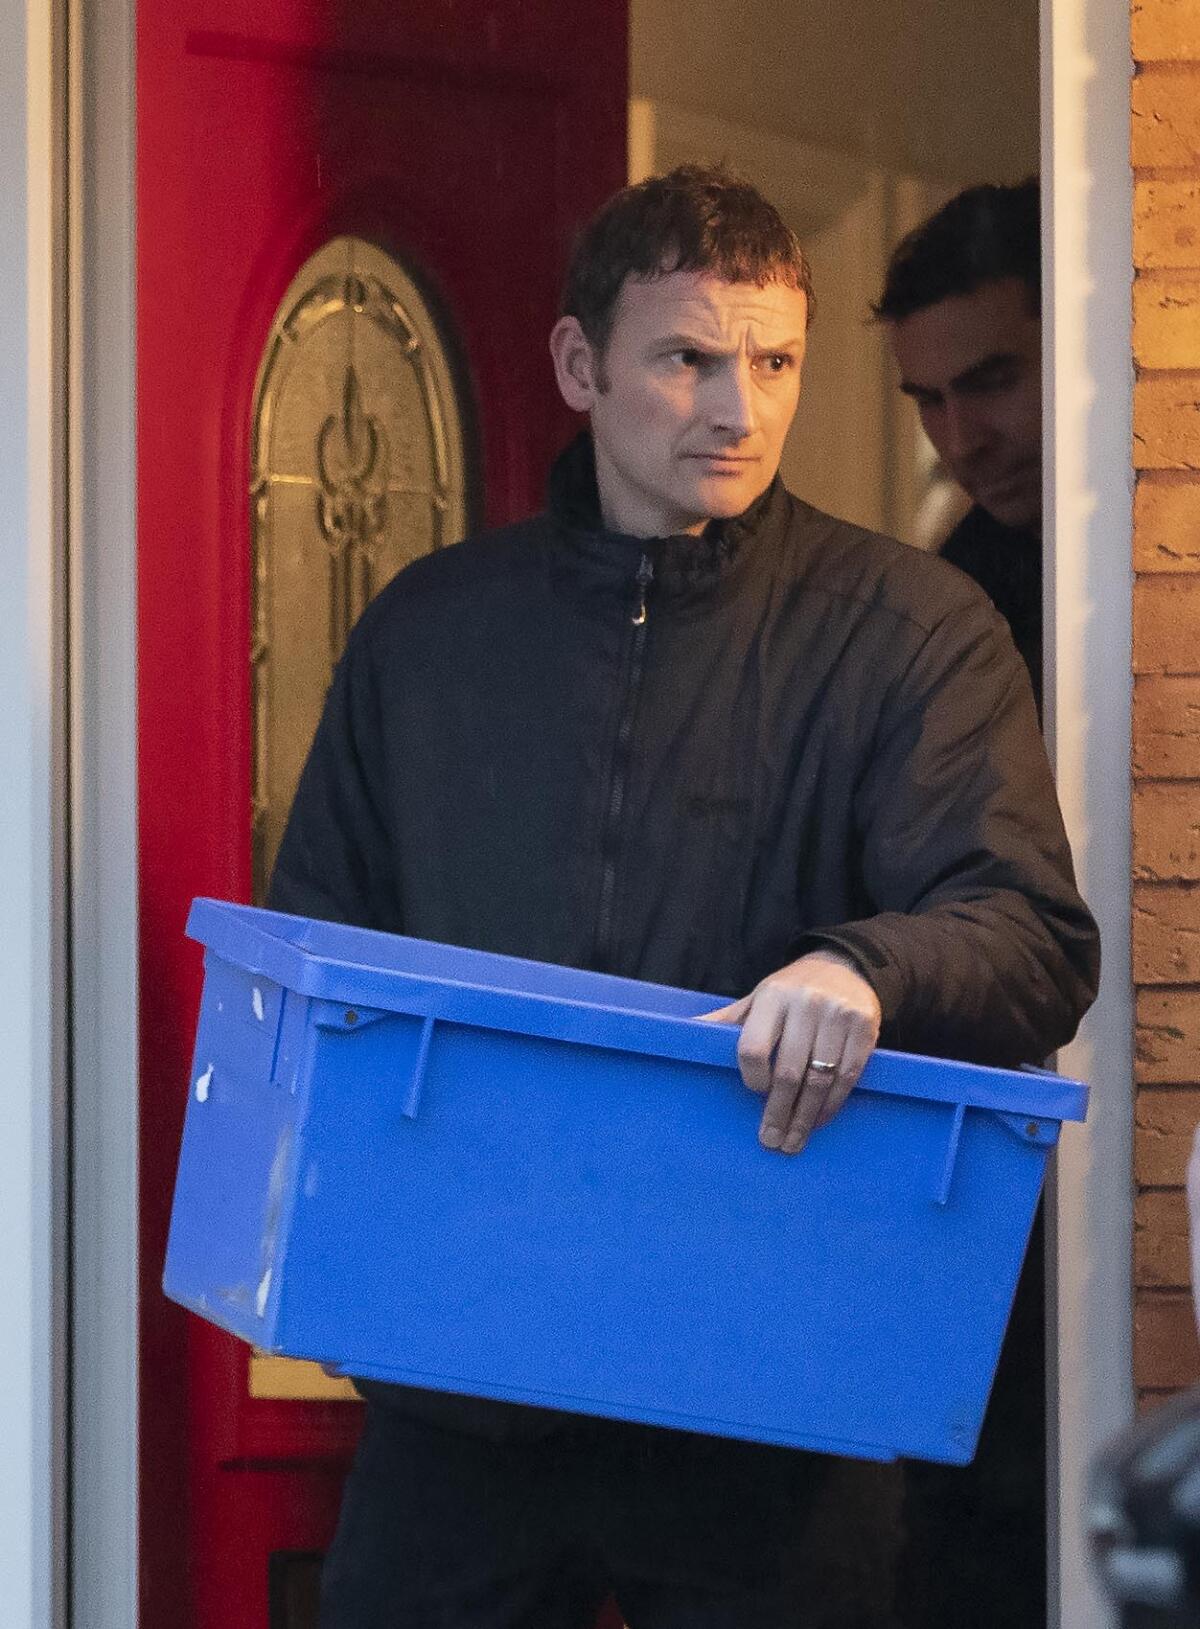 A police officer carrying an evidence box